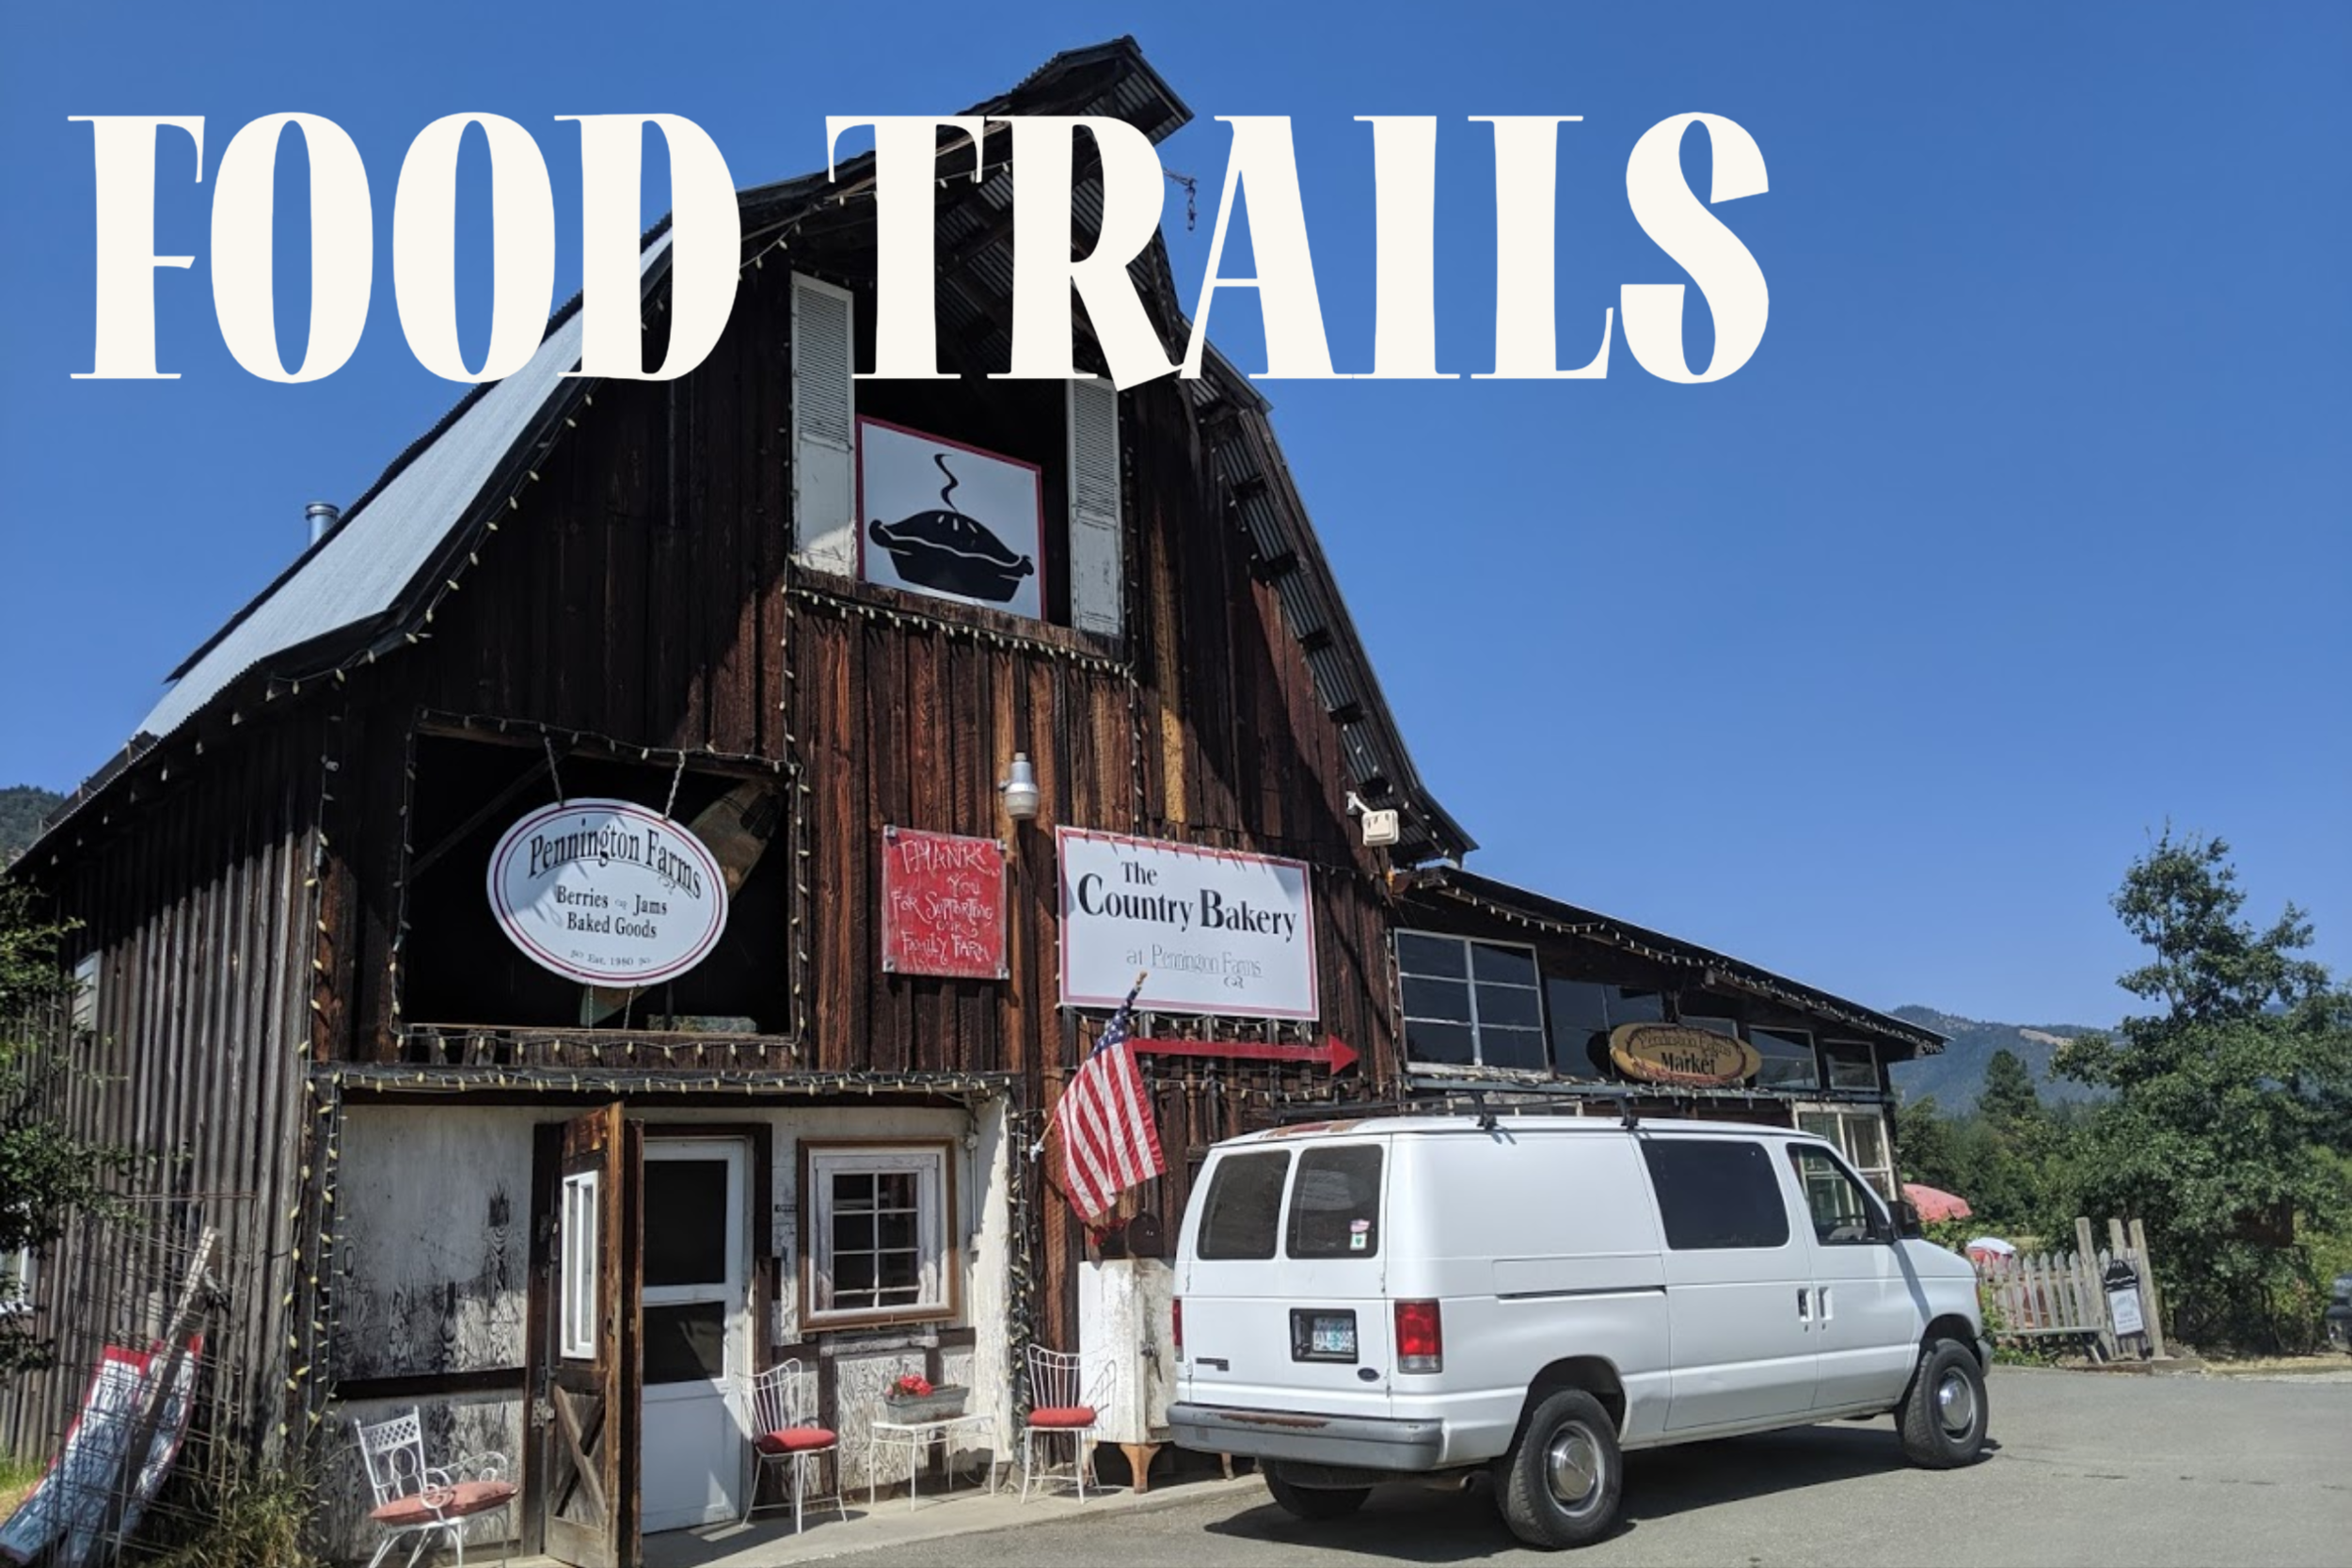 FOOD TRAILS IN SOUTHERN OREGON